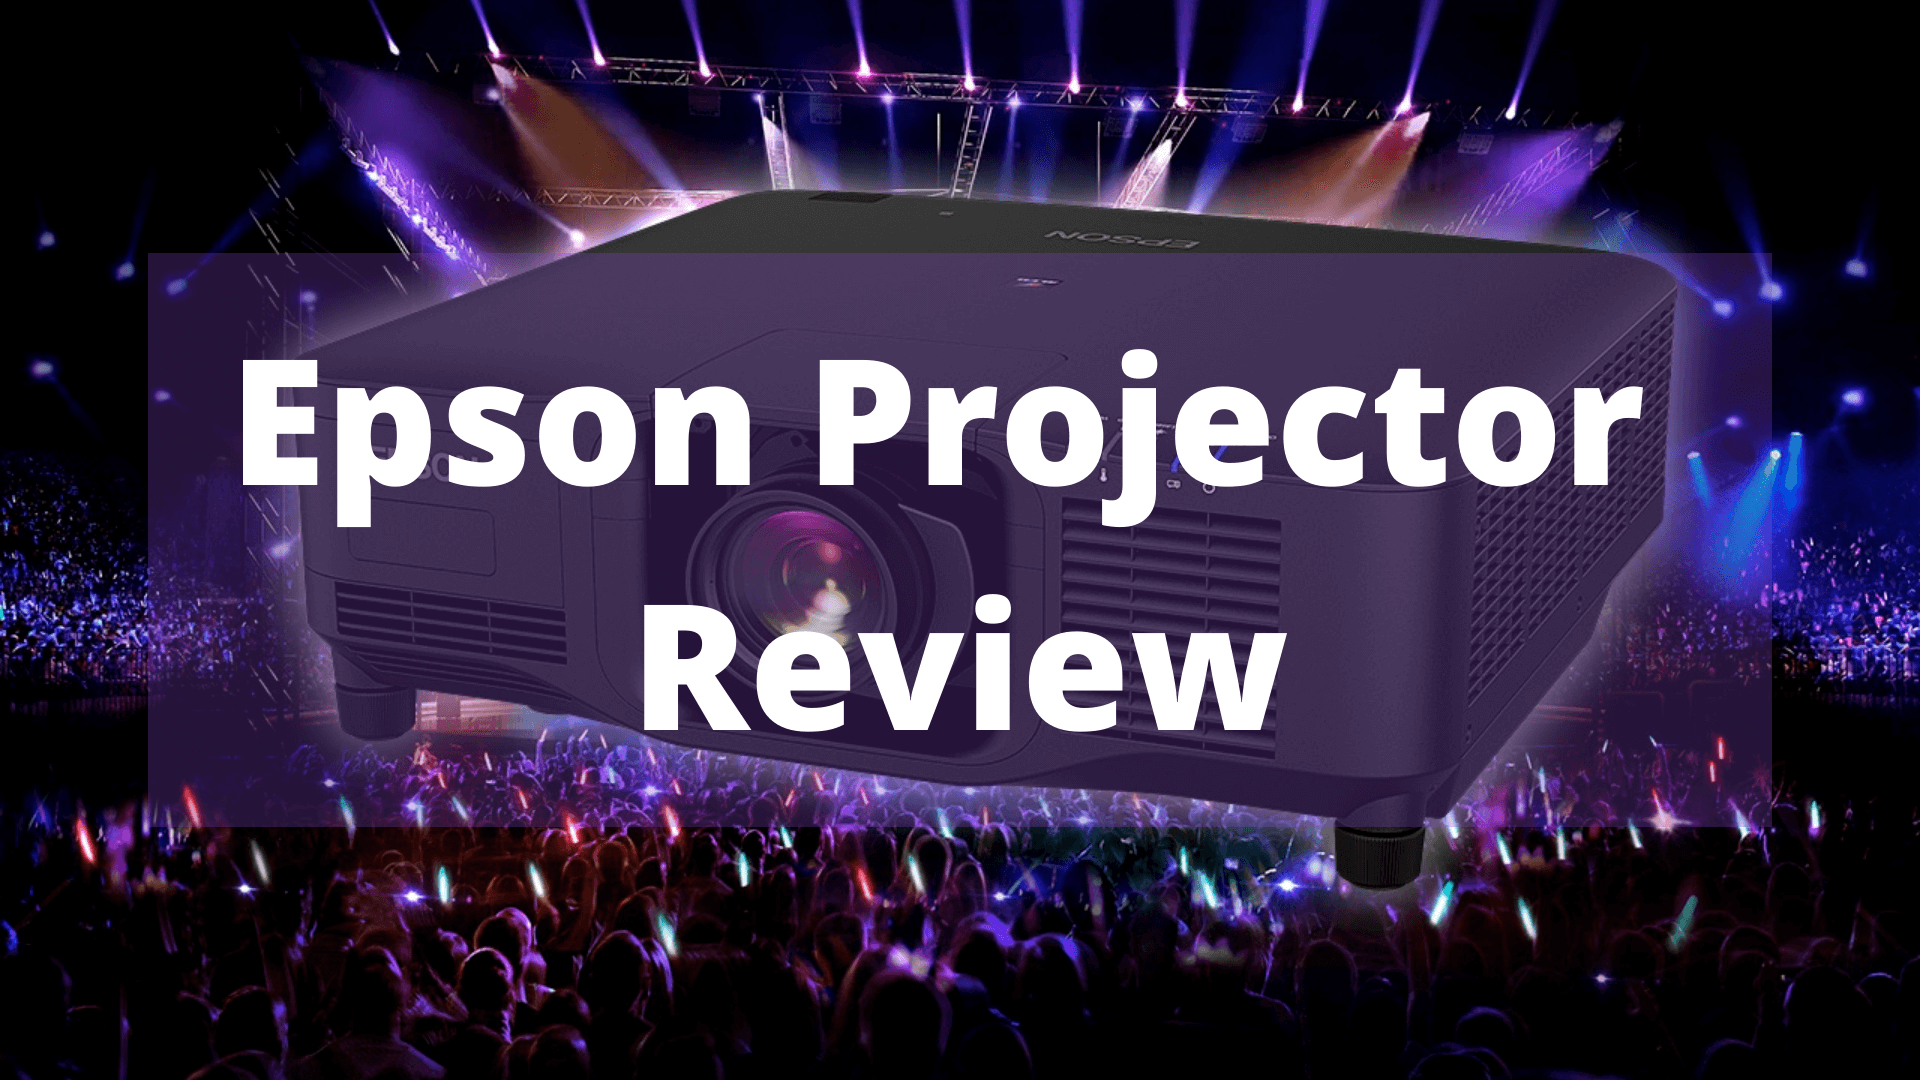 Epson Projector Review